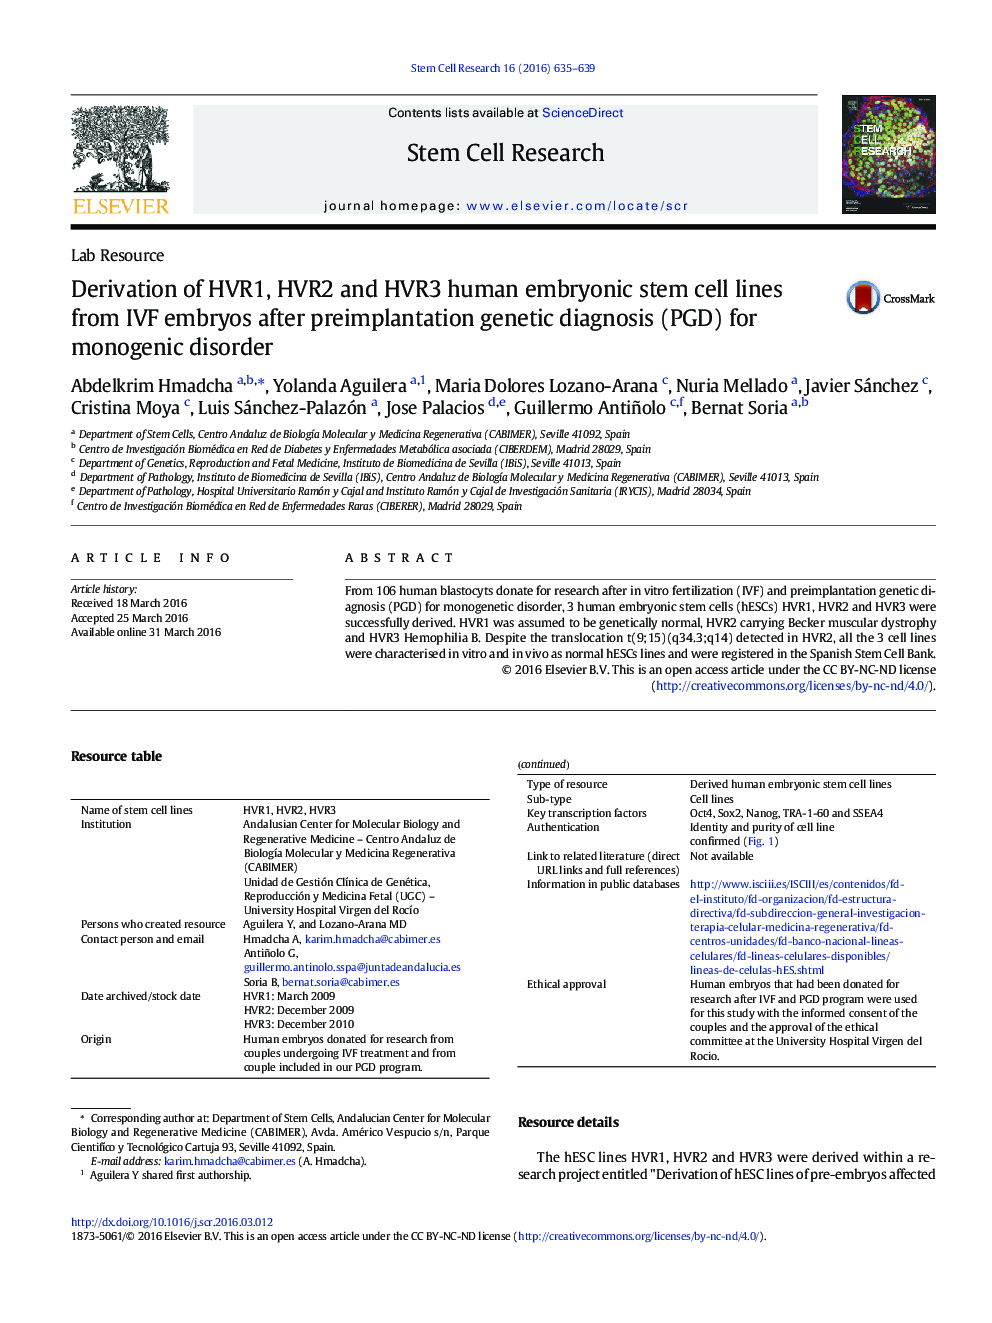 Derivation of HVR1, HVR2 and HVR3 human embryonic stem cell lines from IVF embryos after preimplantation genetic diagnosis (PGD) for monogenic disorder